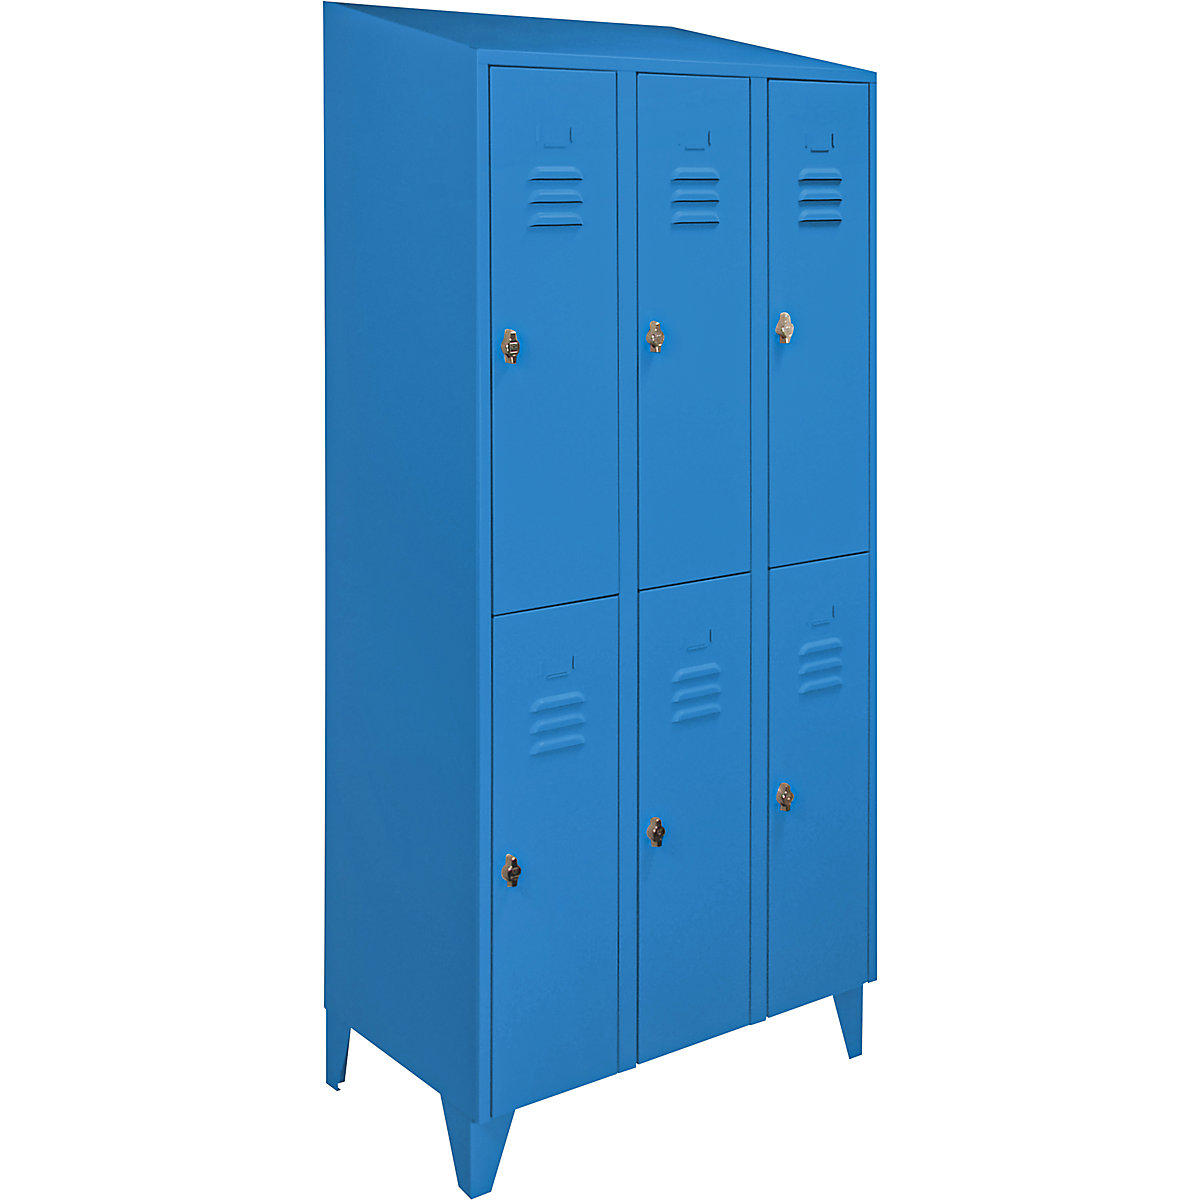 Cloakroom locker with sloping roof, half-height compartments – Wolf